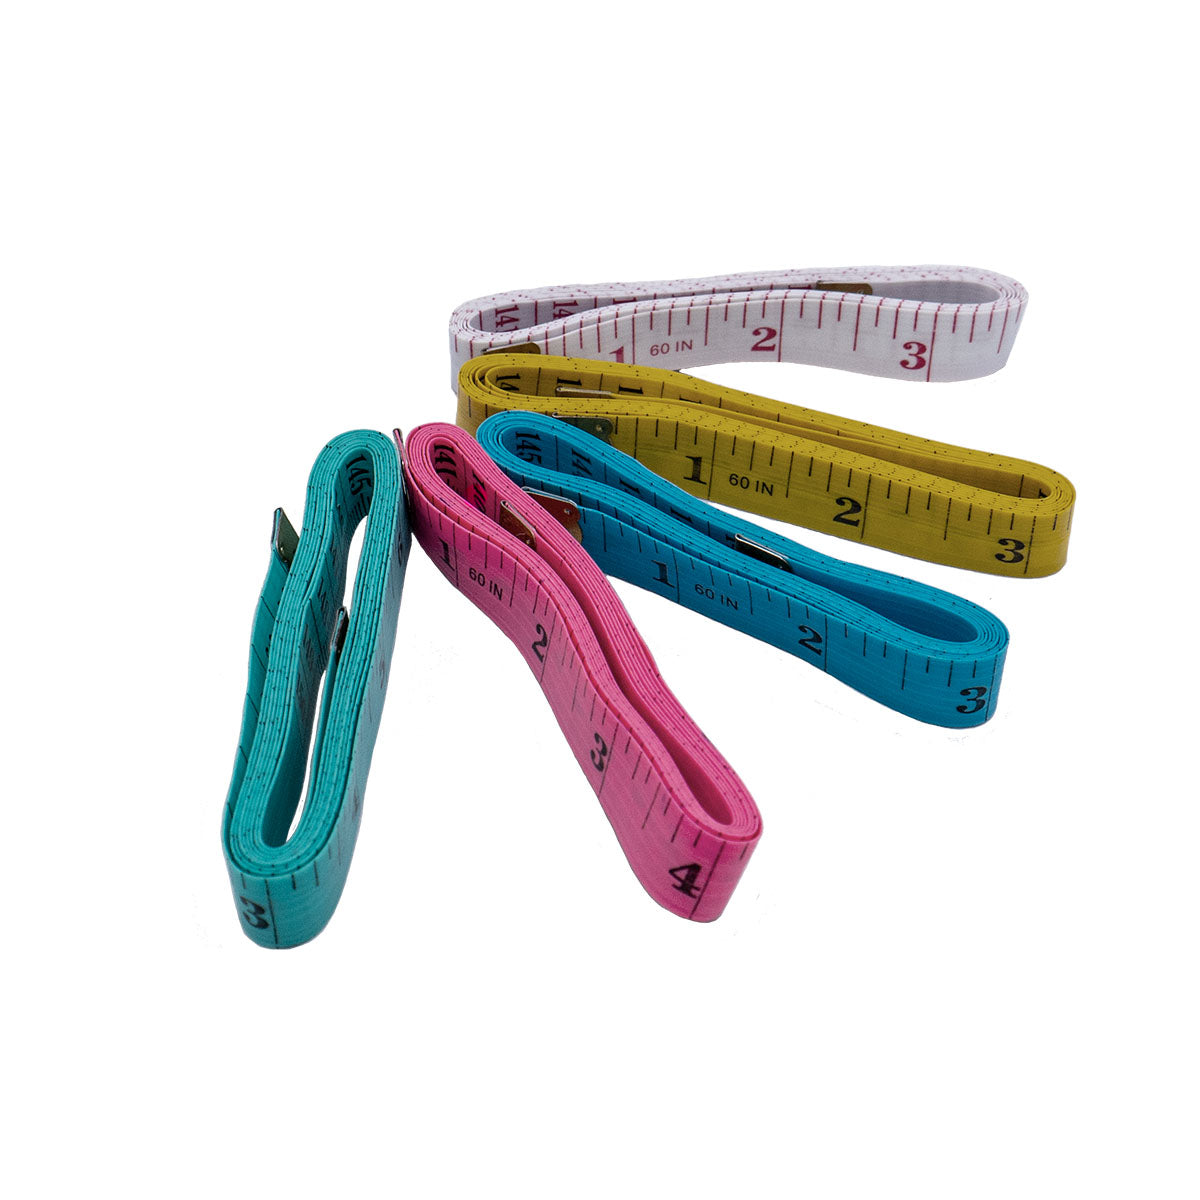 Assorted measuring tape in various colors fanned out.